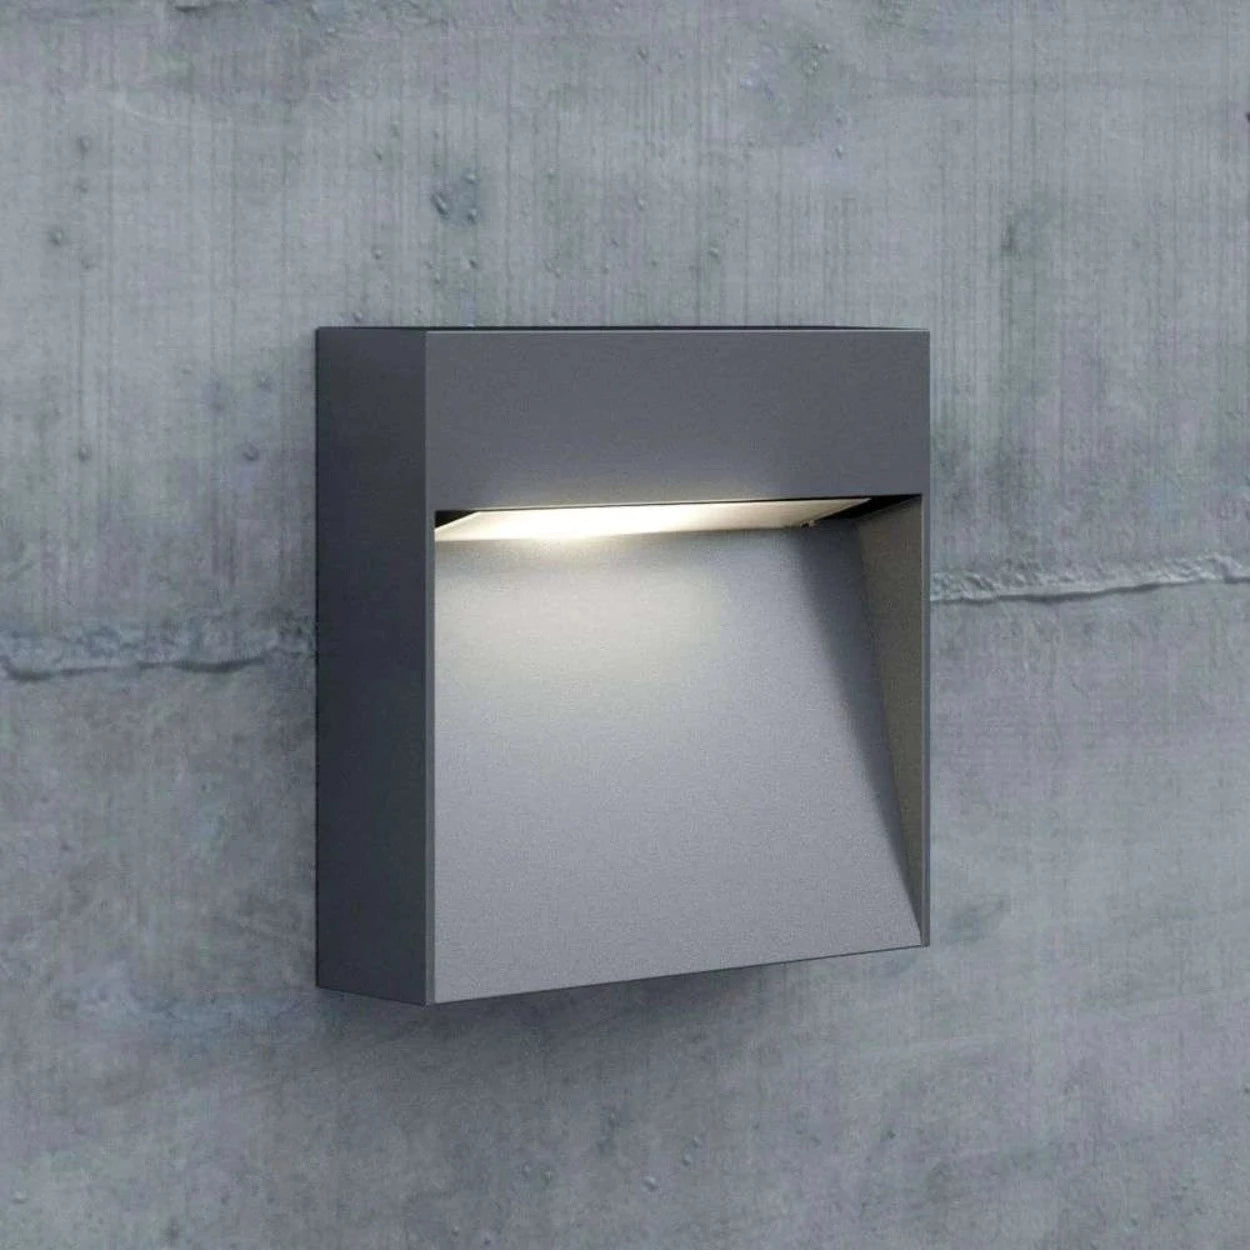 ANKUR SQUARE SURFACE OUTDOOR RATED LED FOOT LIGHT FOR ROOMS, STAIRCASES OR PATHWAYS